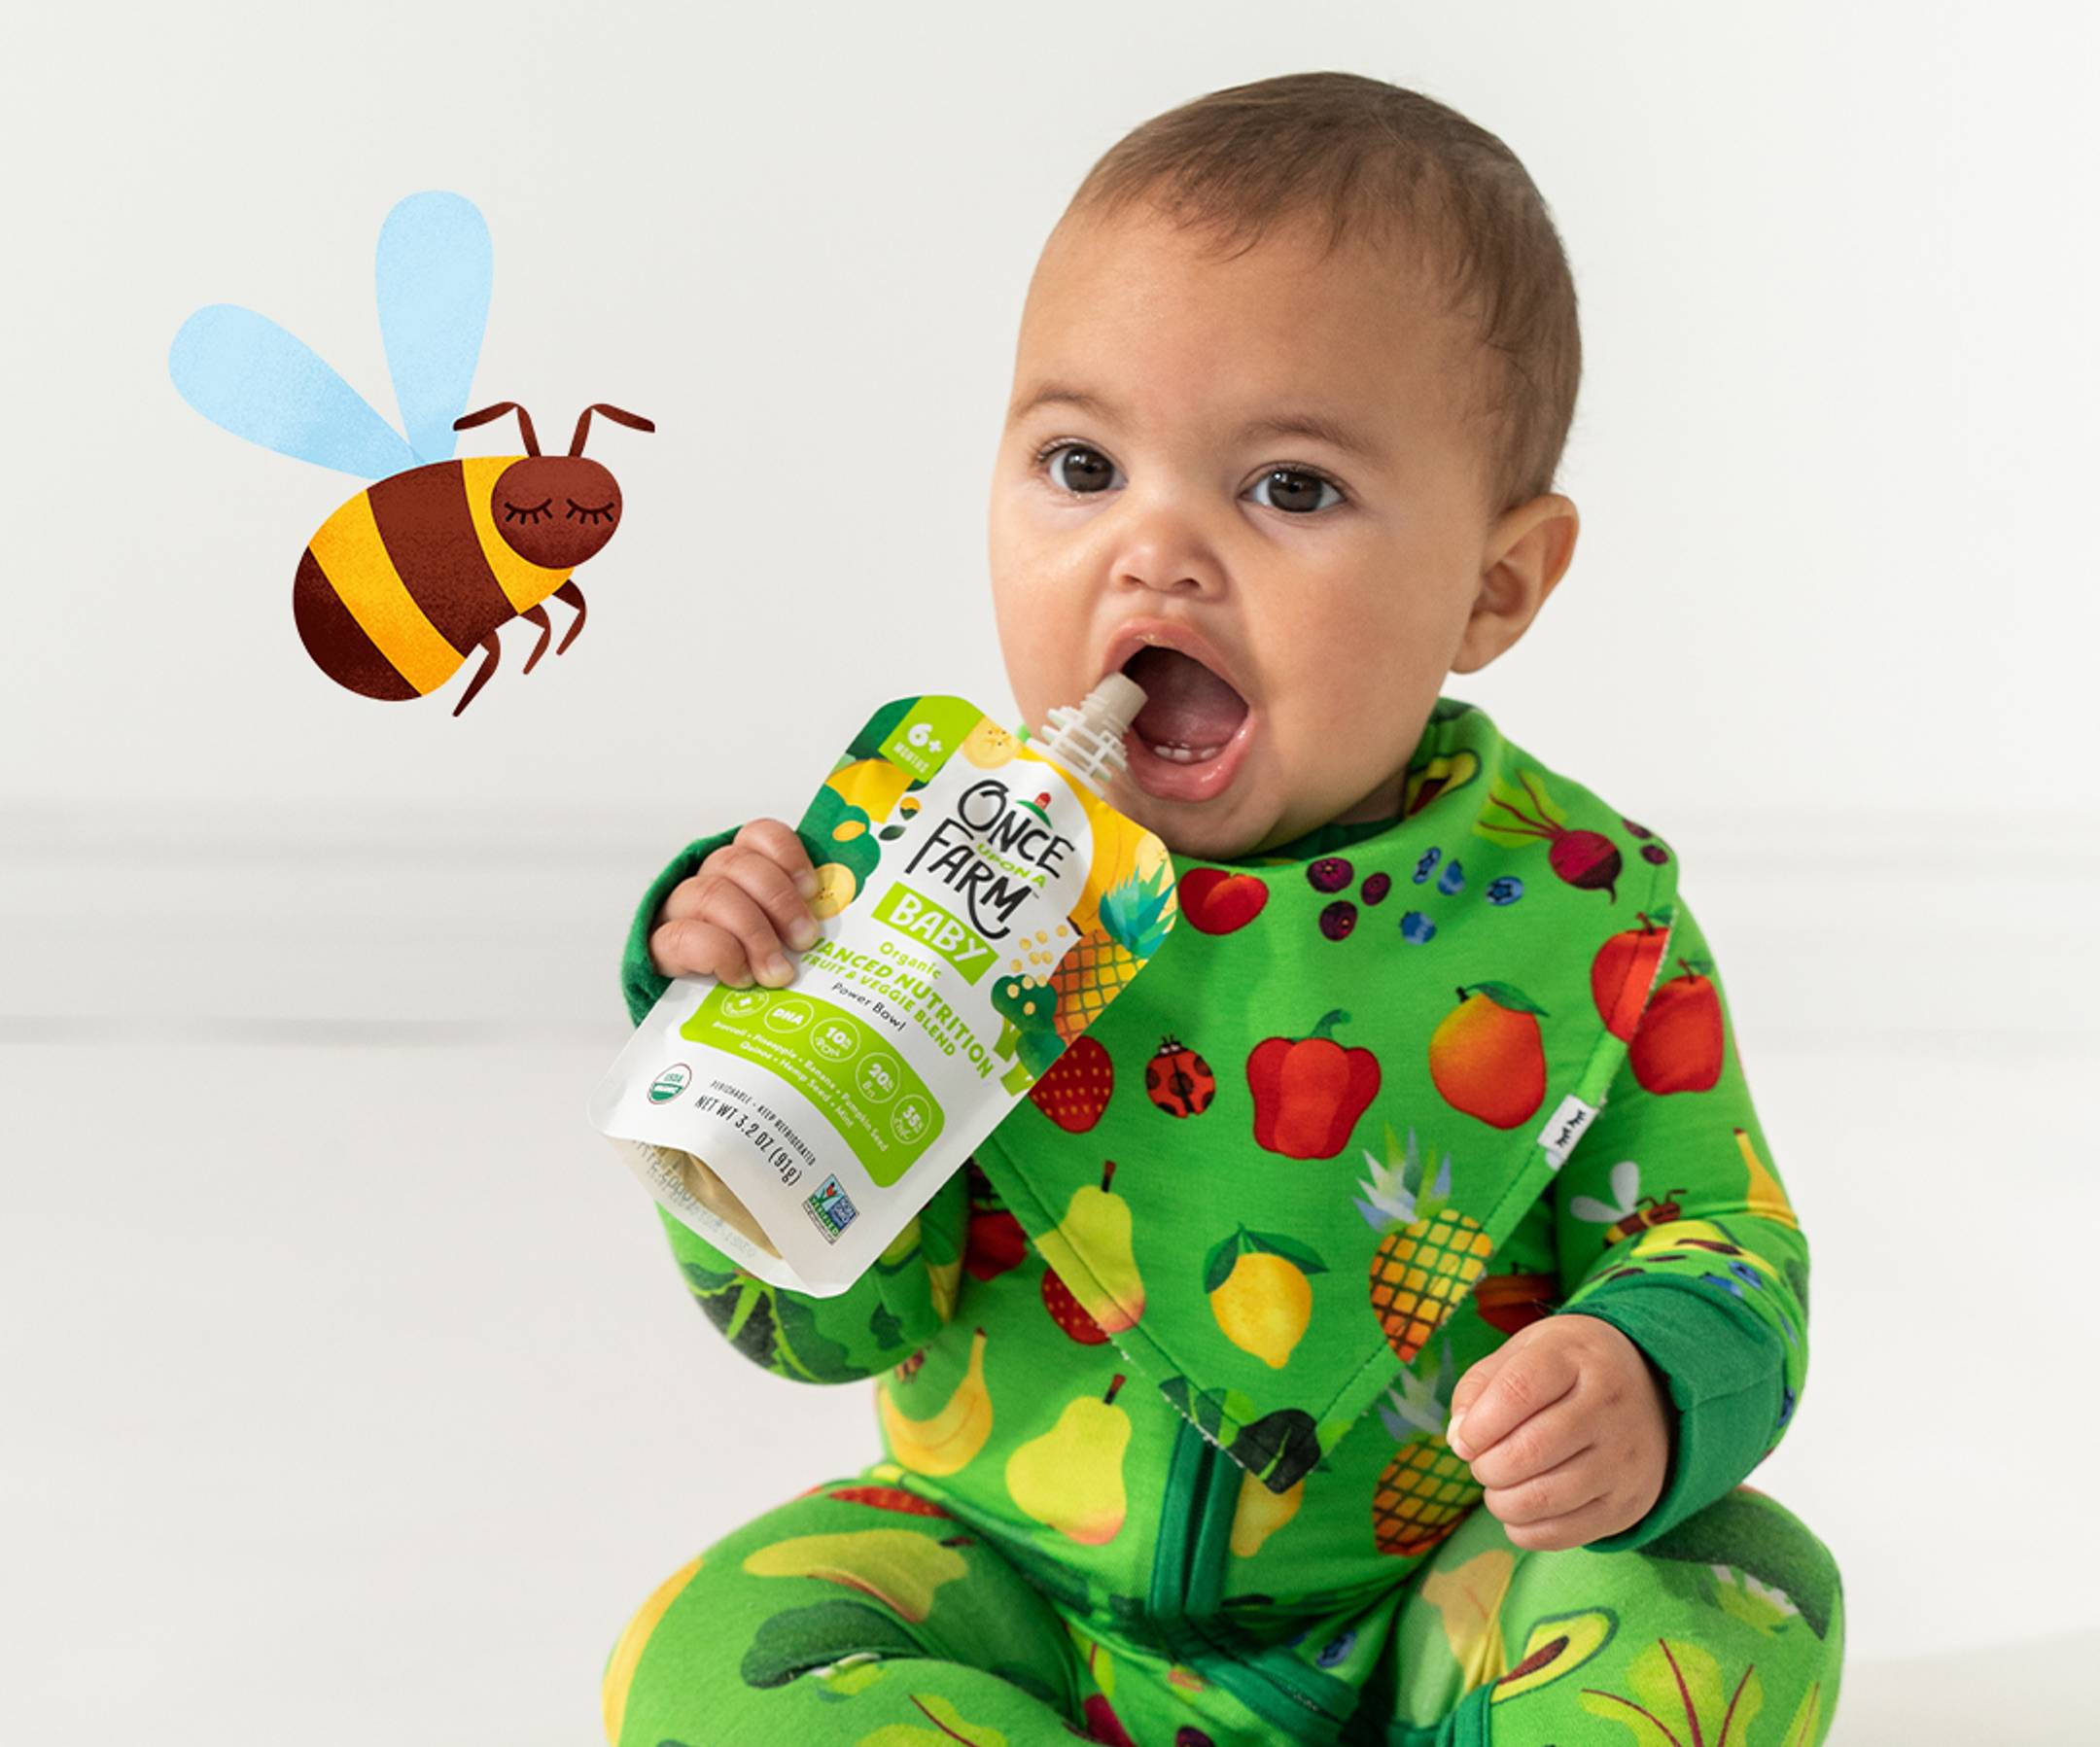 A baby in Little Sleepies x Once Upon a Farm pajamas eating an Advanced Nutrition Pouch with a sleepy bee illustration in the background. 